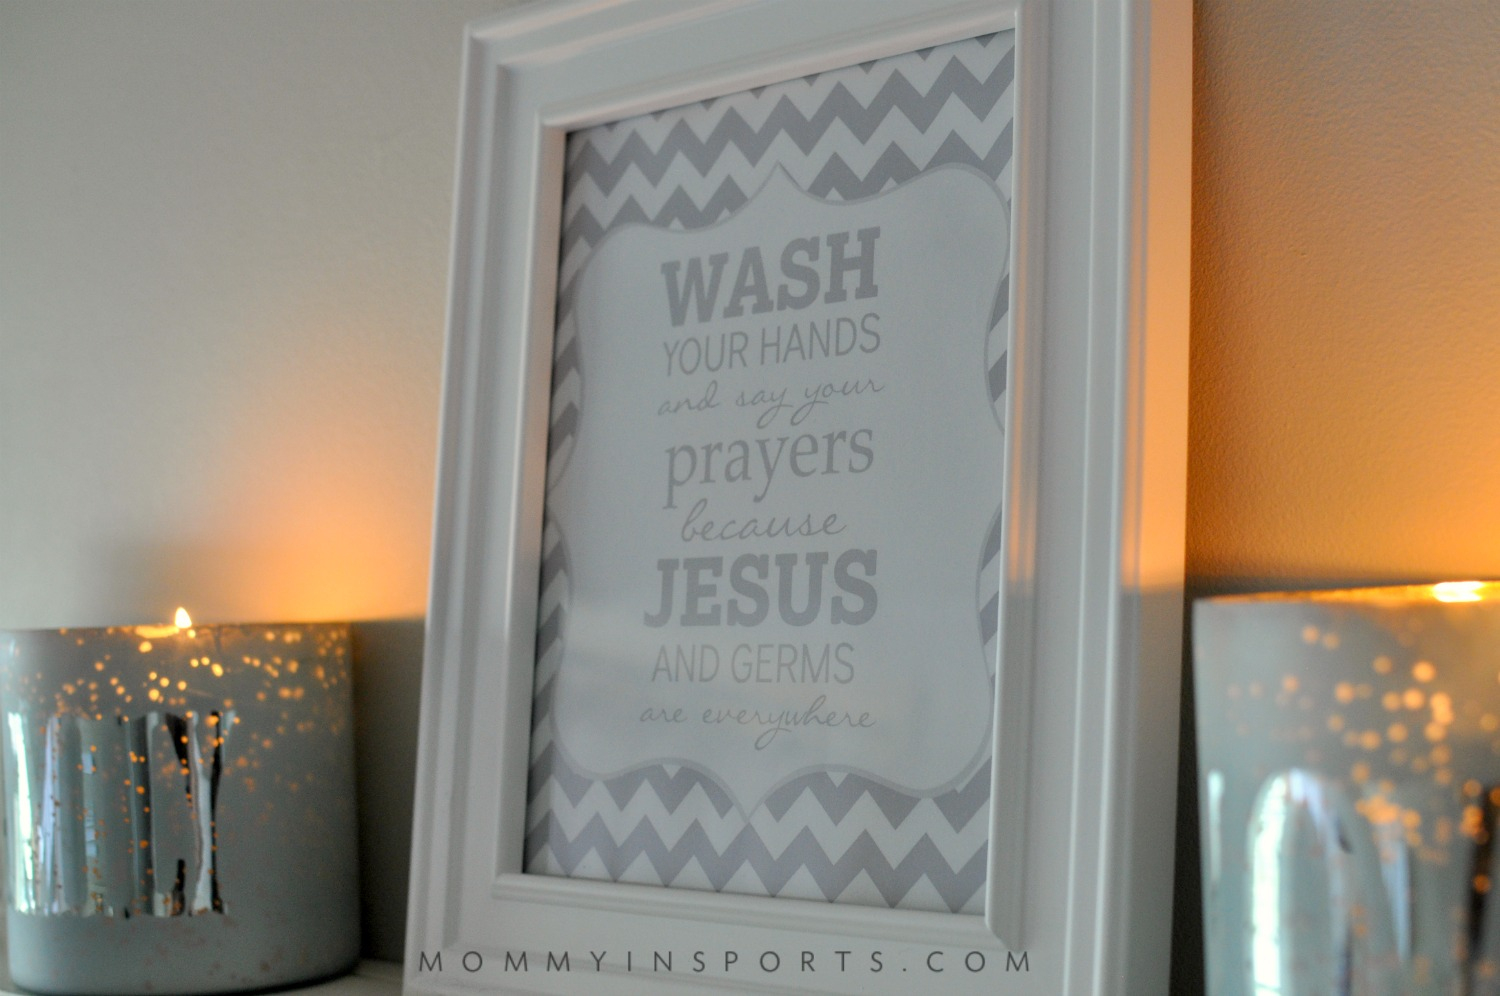 Free Bathroom Printable - Kristen Hewitt - Wash Your Hands And Say Your Prayers Free Printable